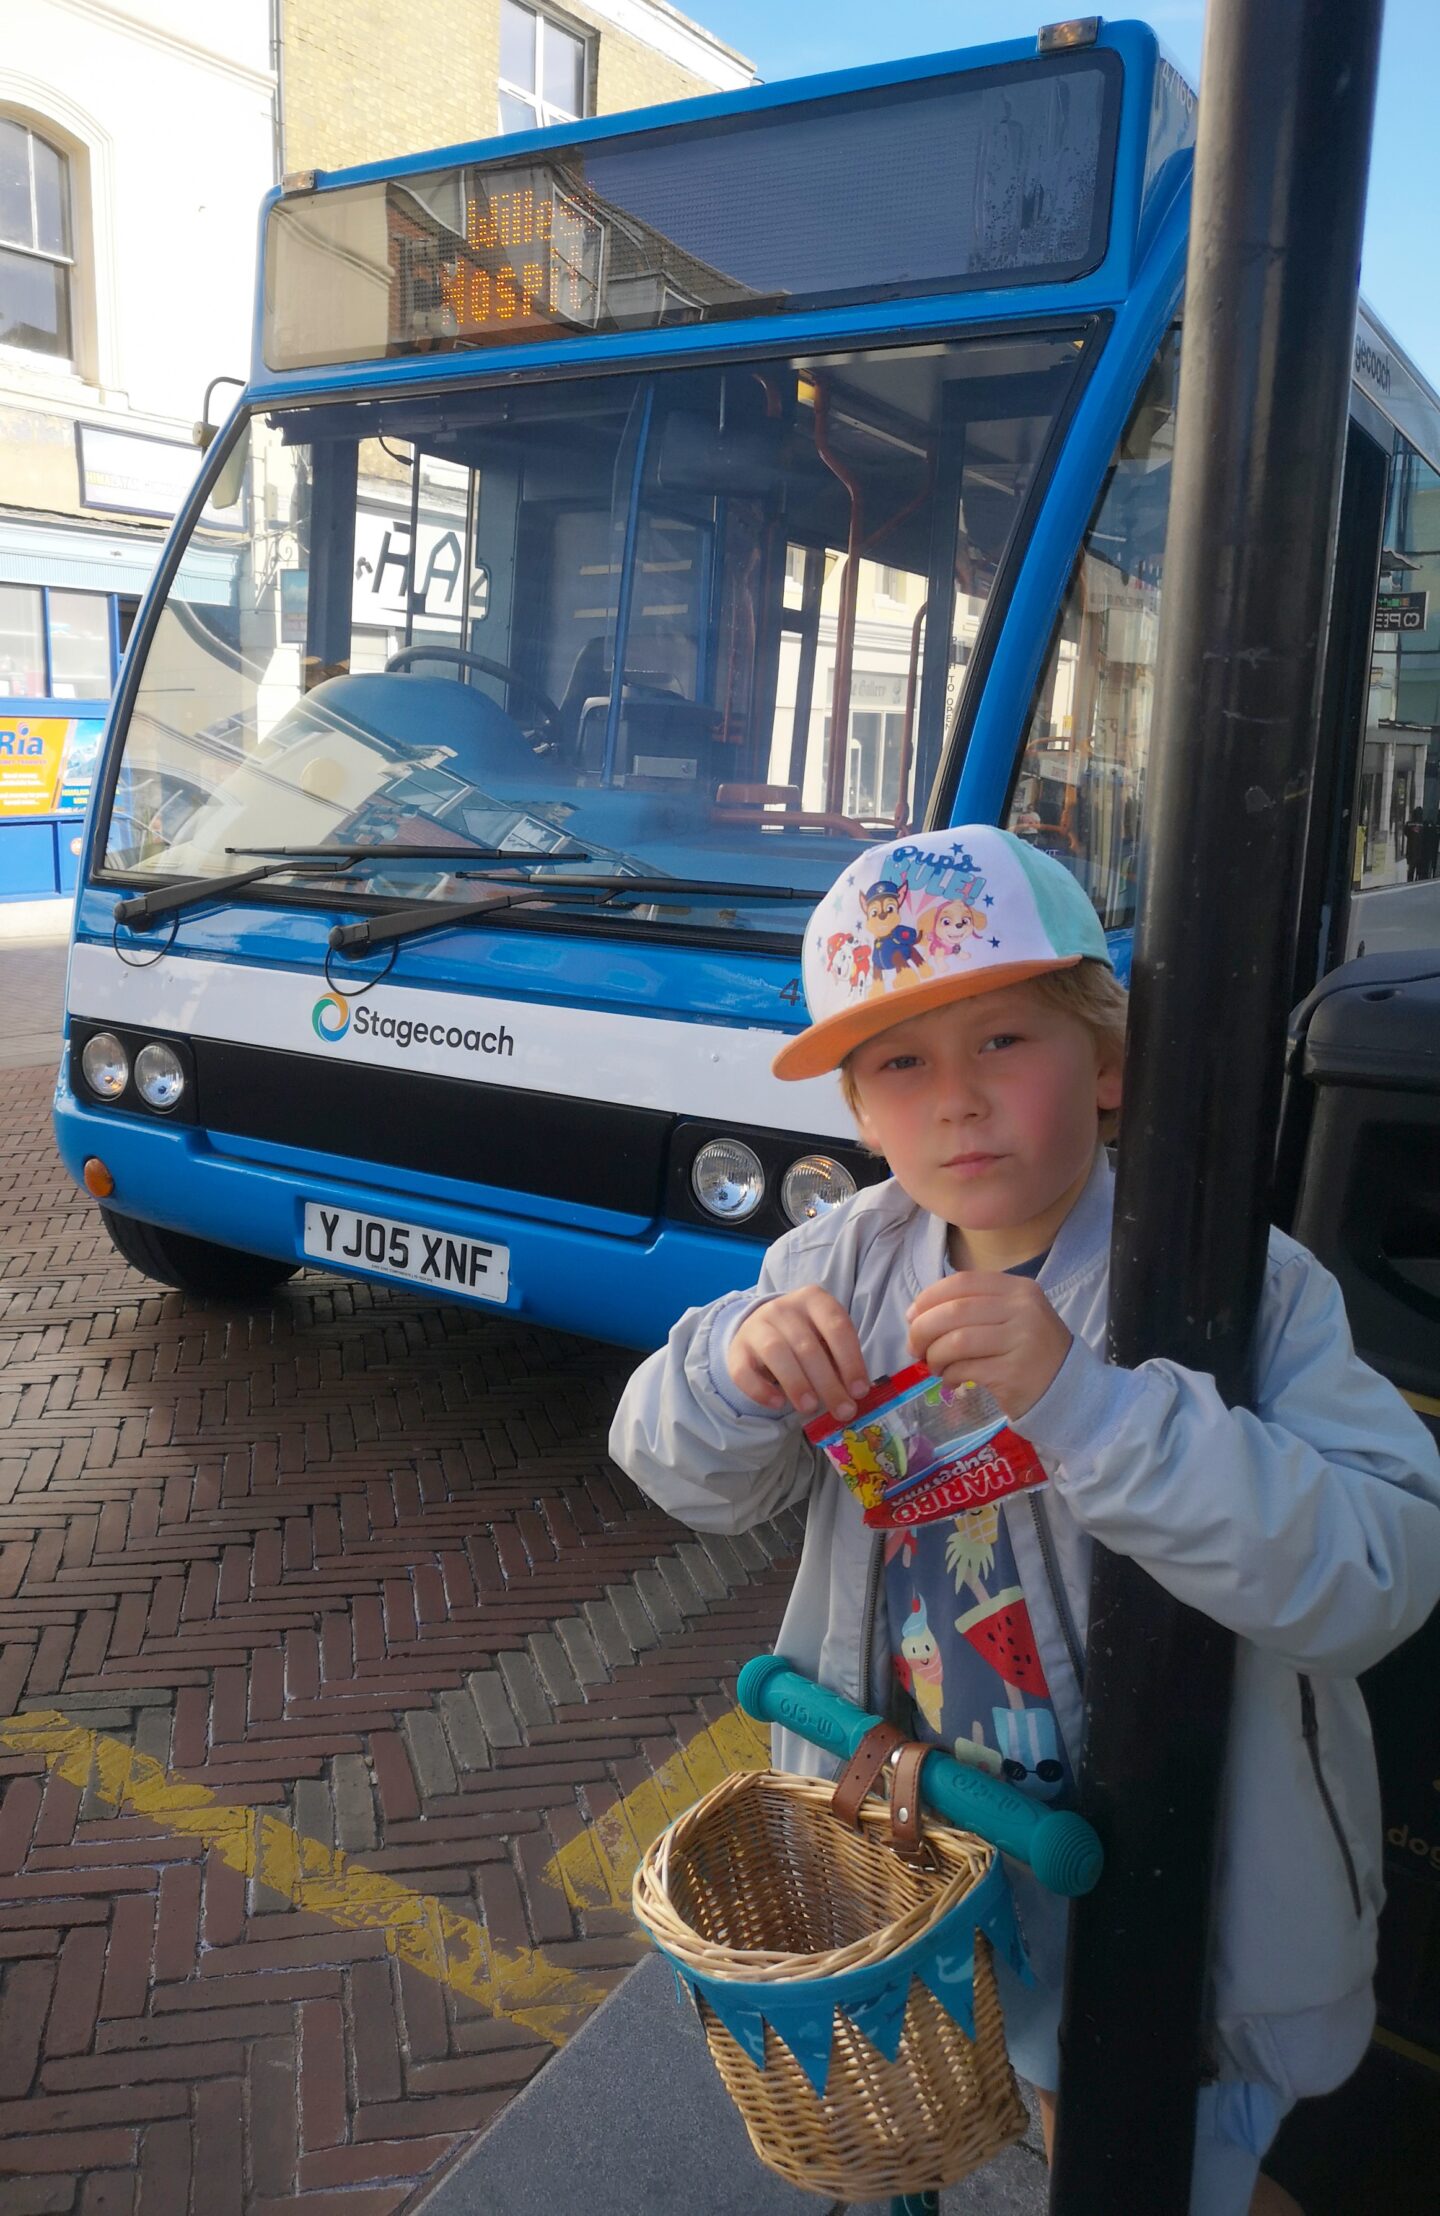  Stagecoach Bus Trip Challenge, StageCoach, Bus Trip, Visit Ashford, Family Time, Kent Life, Ashford Council, Ashford Library, Elwick Place, Stagecoach Bus, the Frenchie Mummy, Family Adventures, Day Trip, Visit Kent